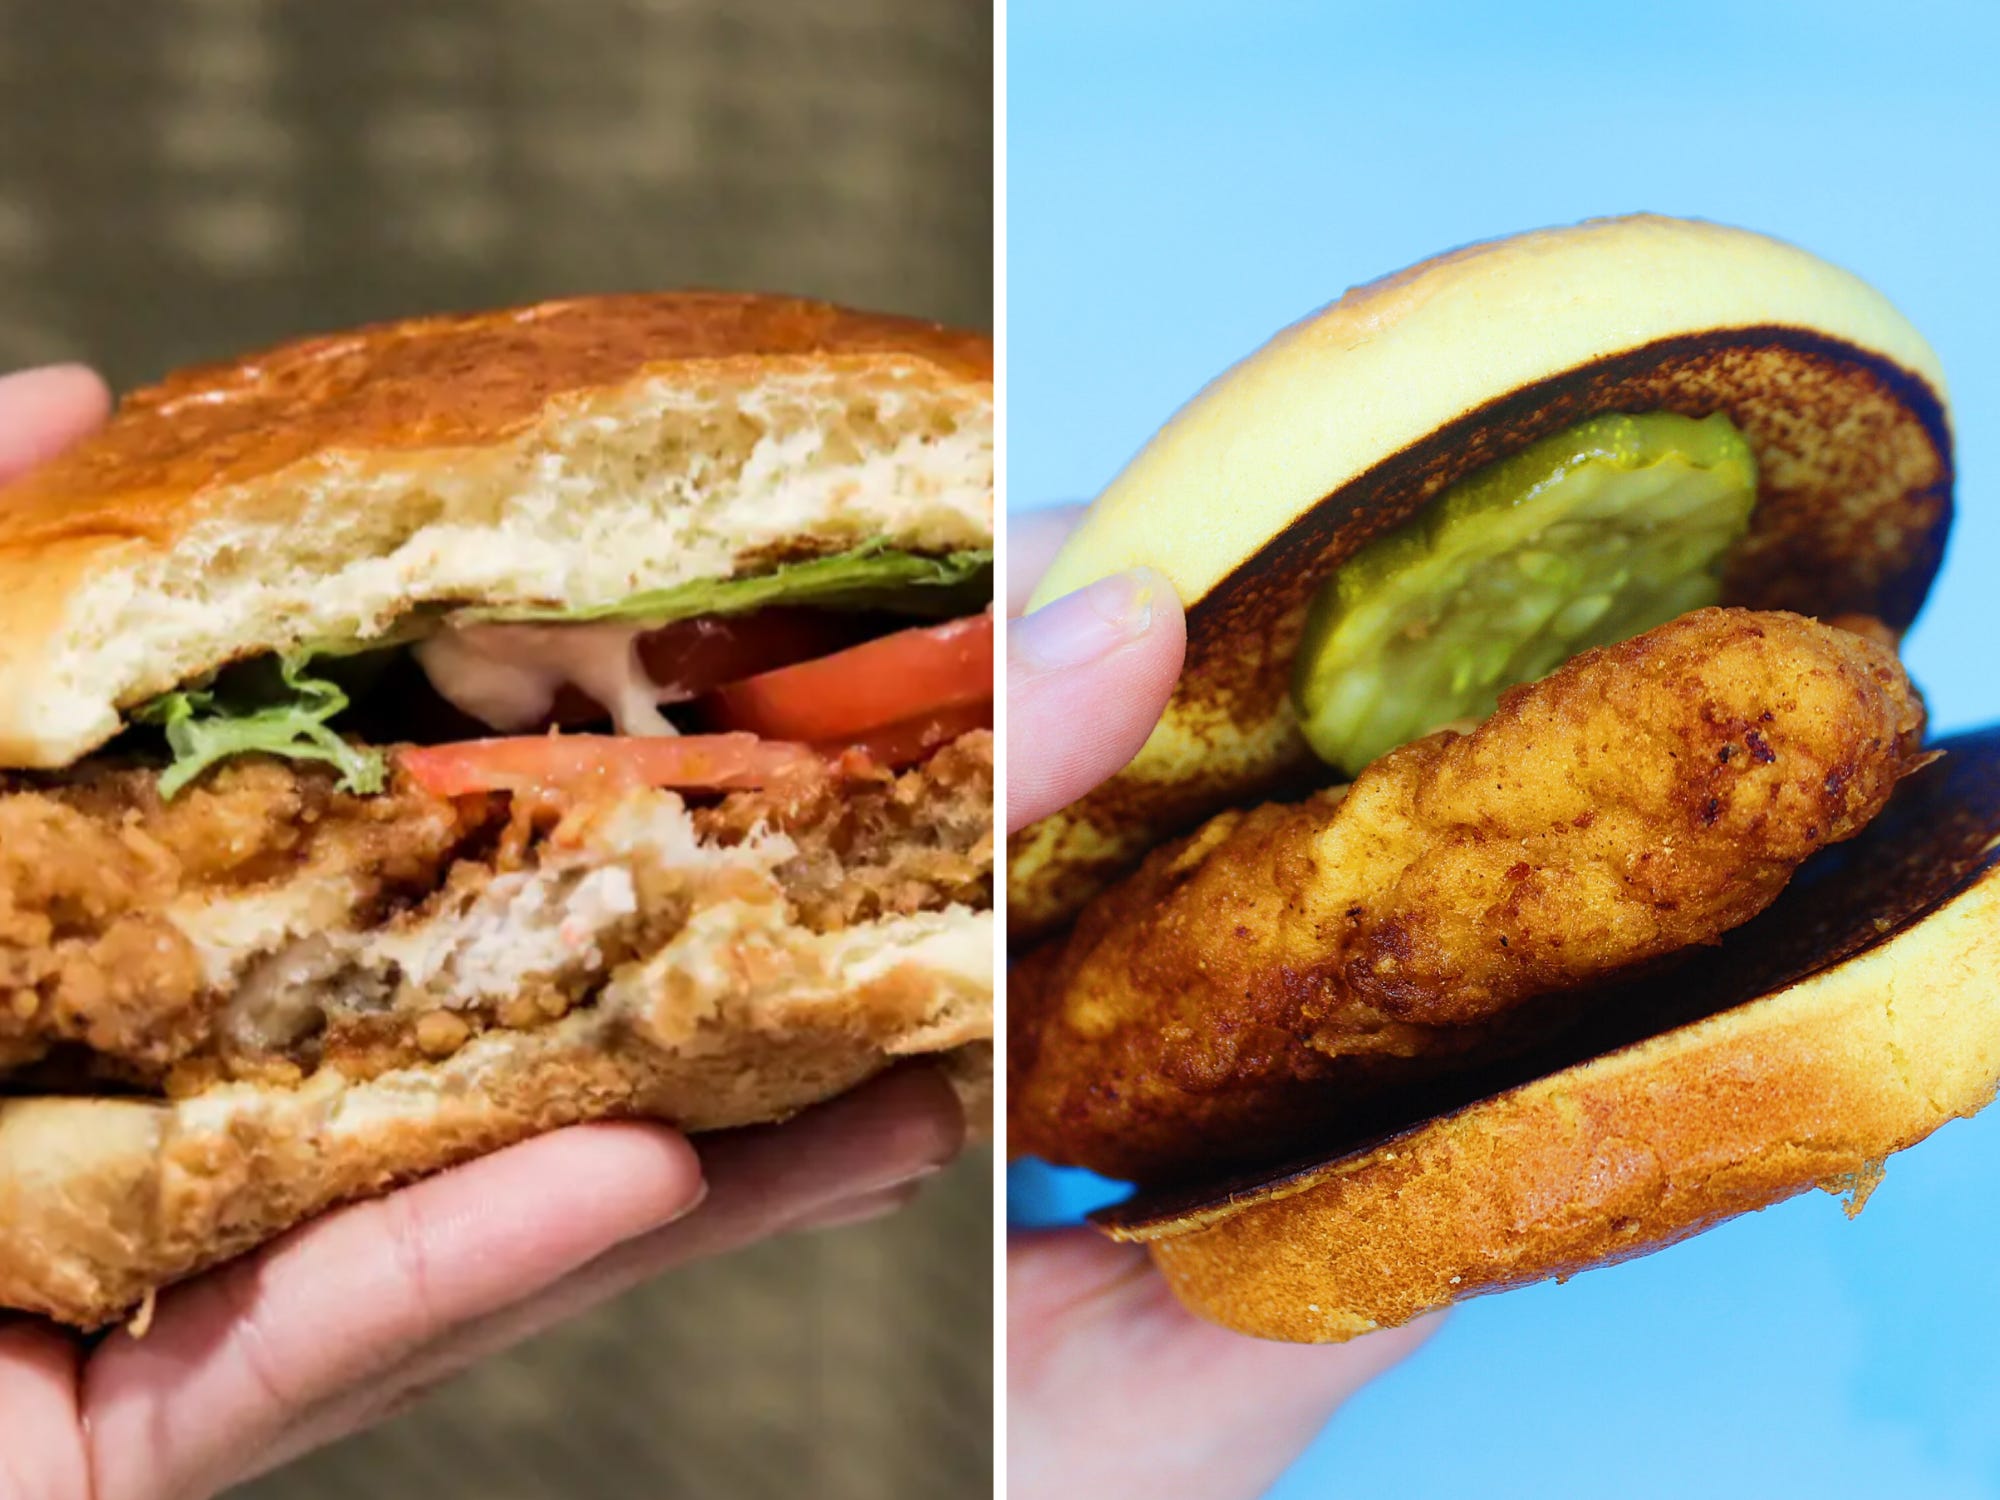 mcdonalds chicken sandwich before and after